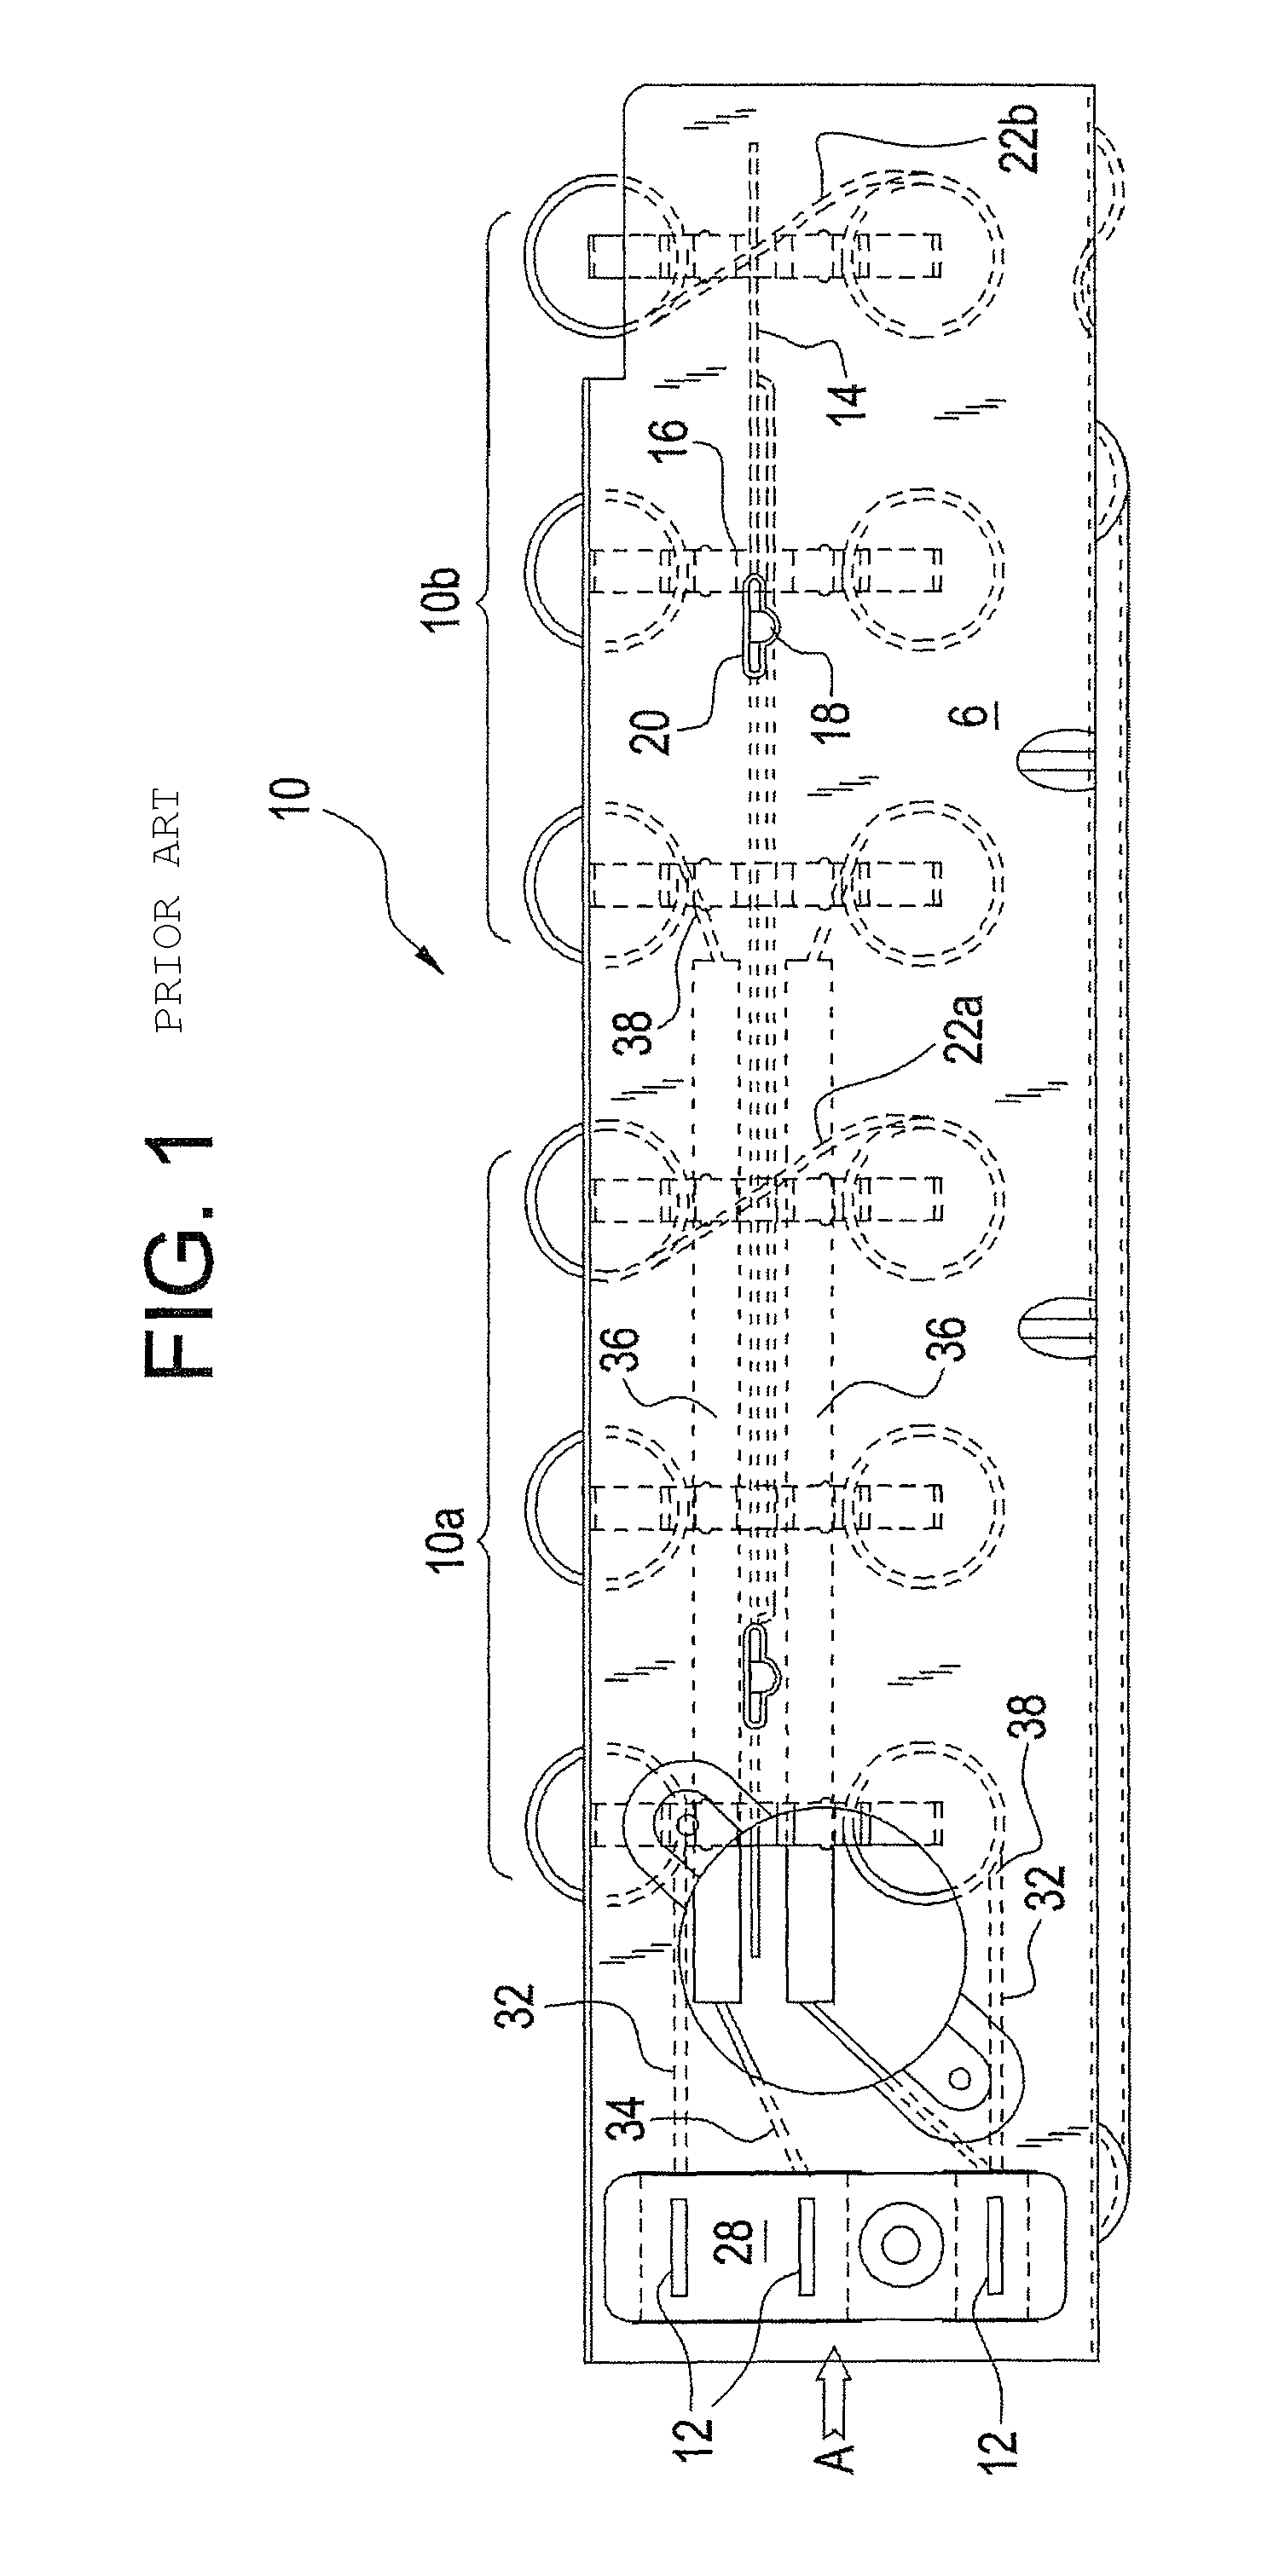 Open coil electric resistance heater with offset coil support and method of use